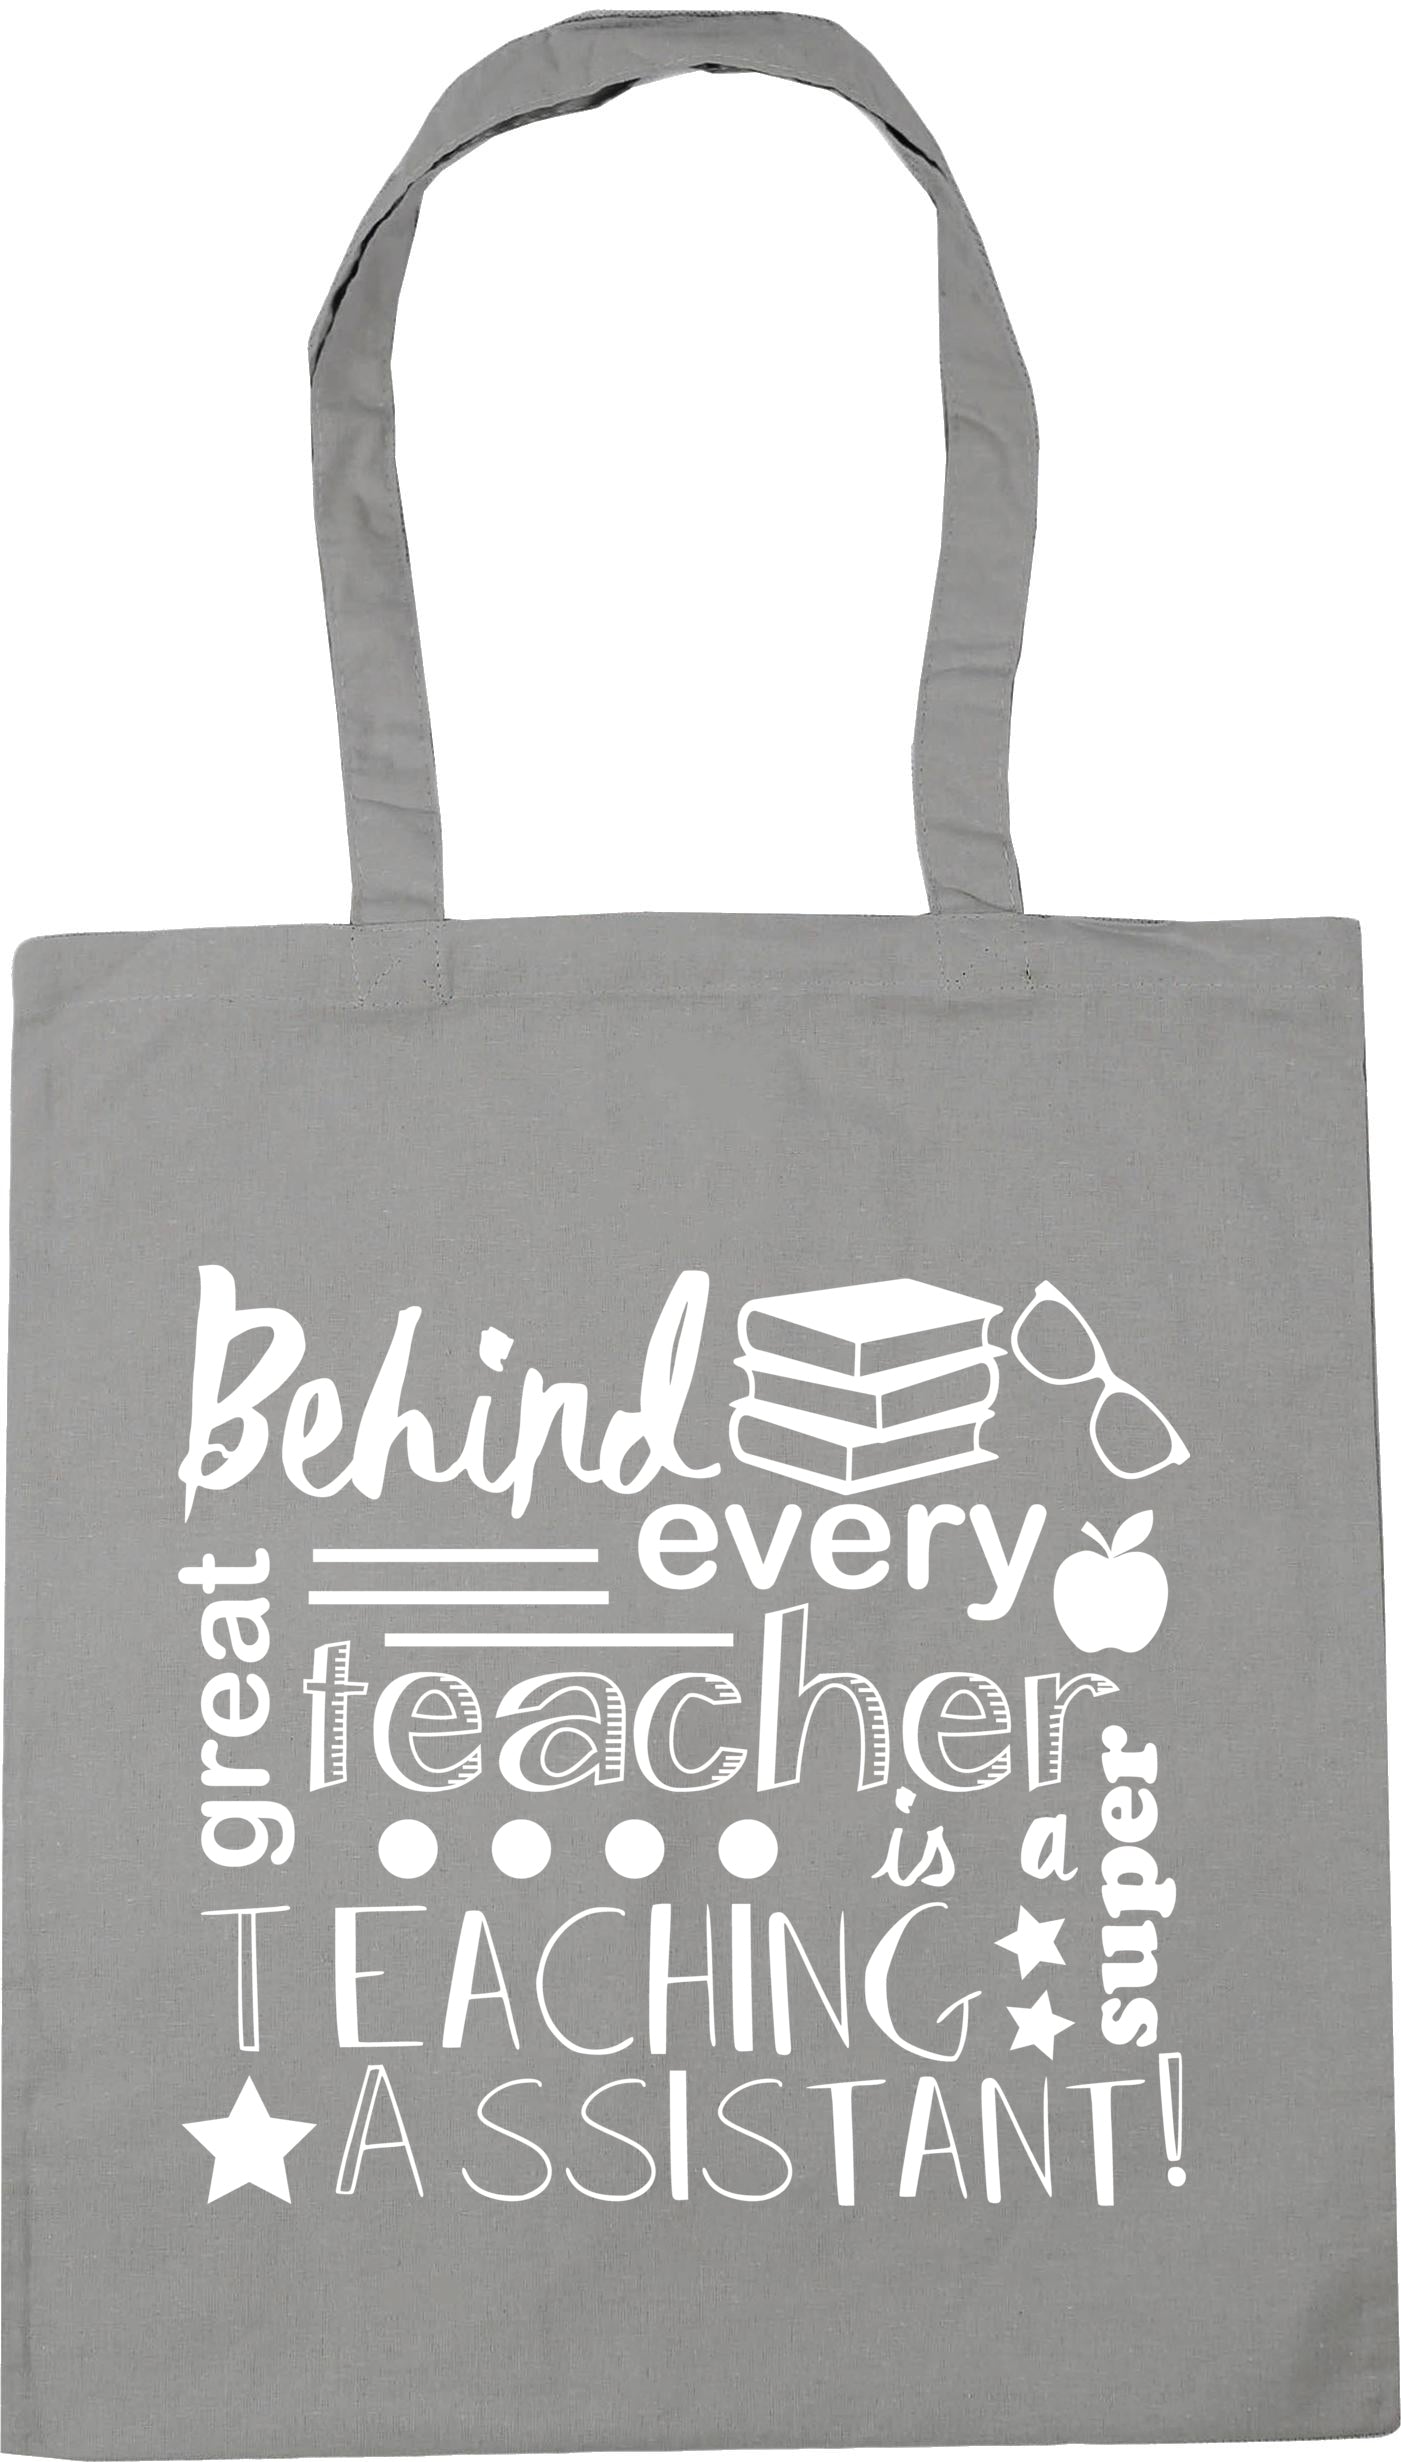 Behind Every Great Teacher Is A Super Teaching Assistant Tote Bag